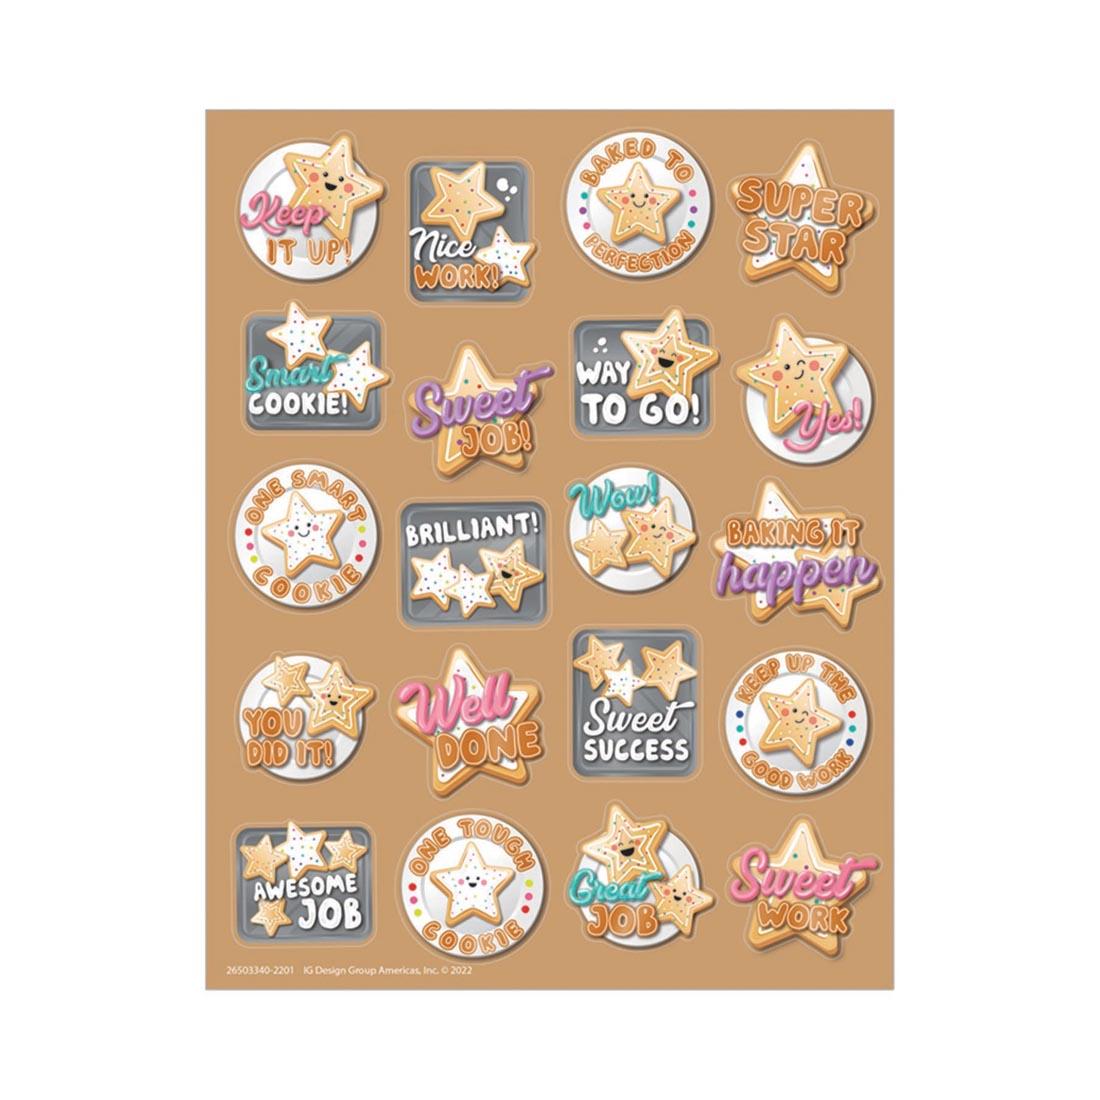 Sample sheet of Star Sugar Cookie Scented Stickers By Eureka, featuring various star shaped cookies and positive phrases